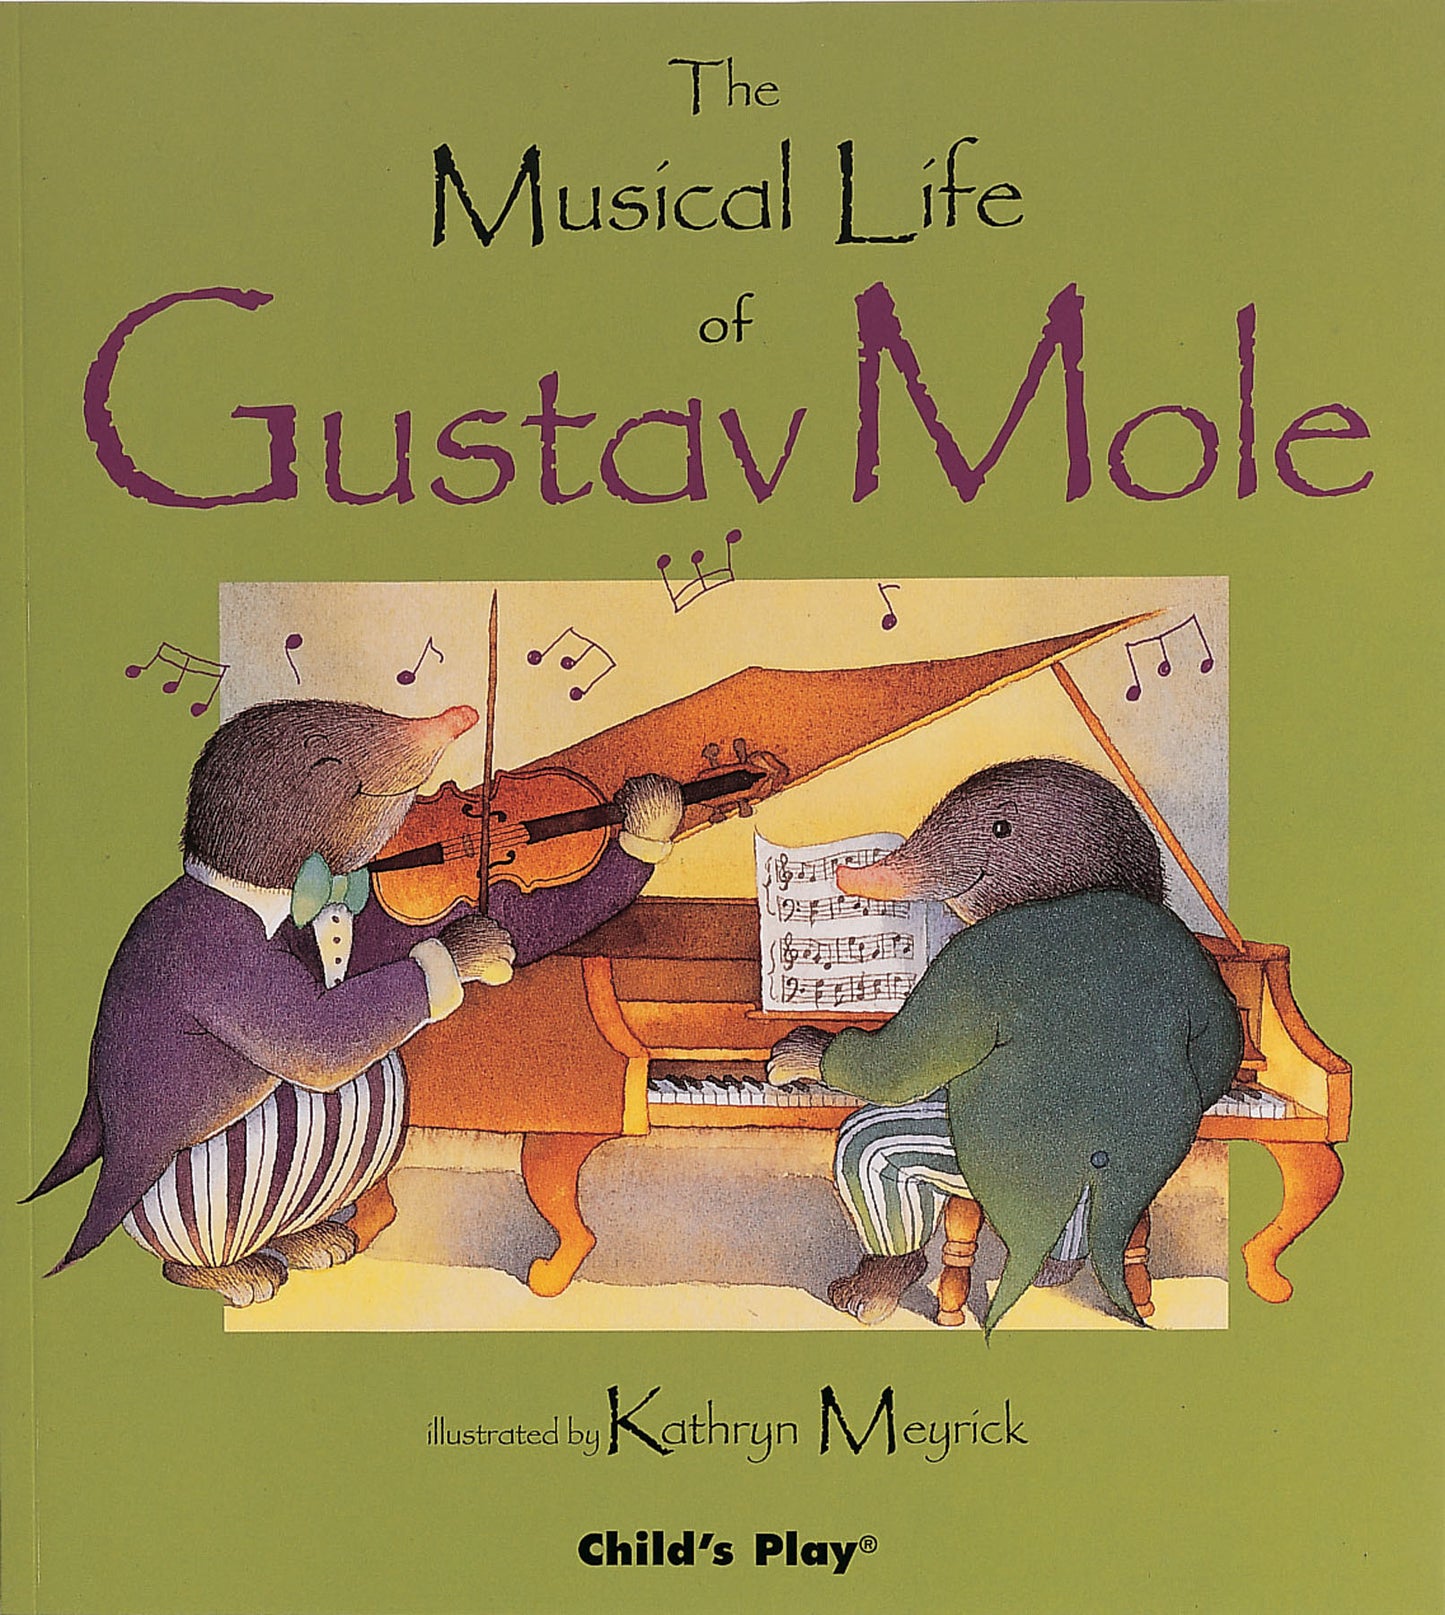 The Musical Life of Gustav Mole (Softcover Edition)